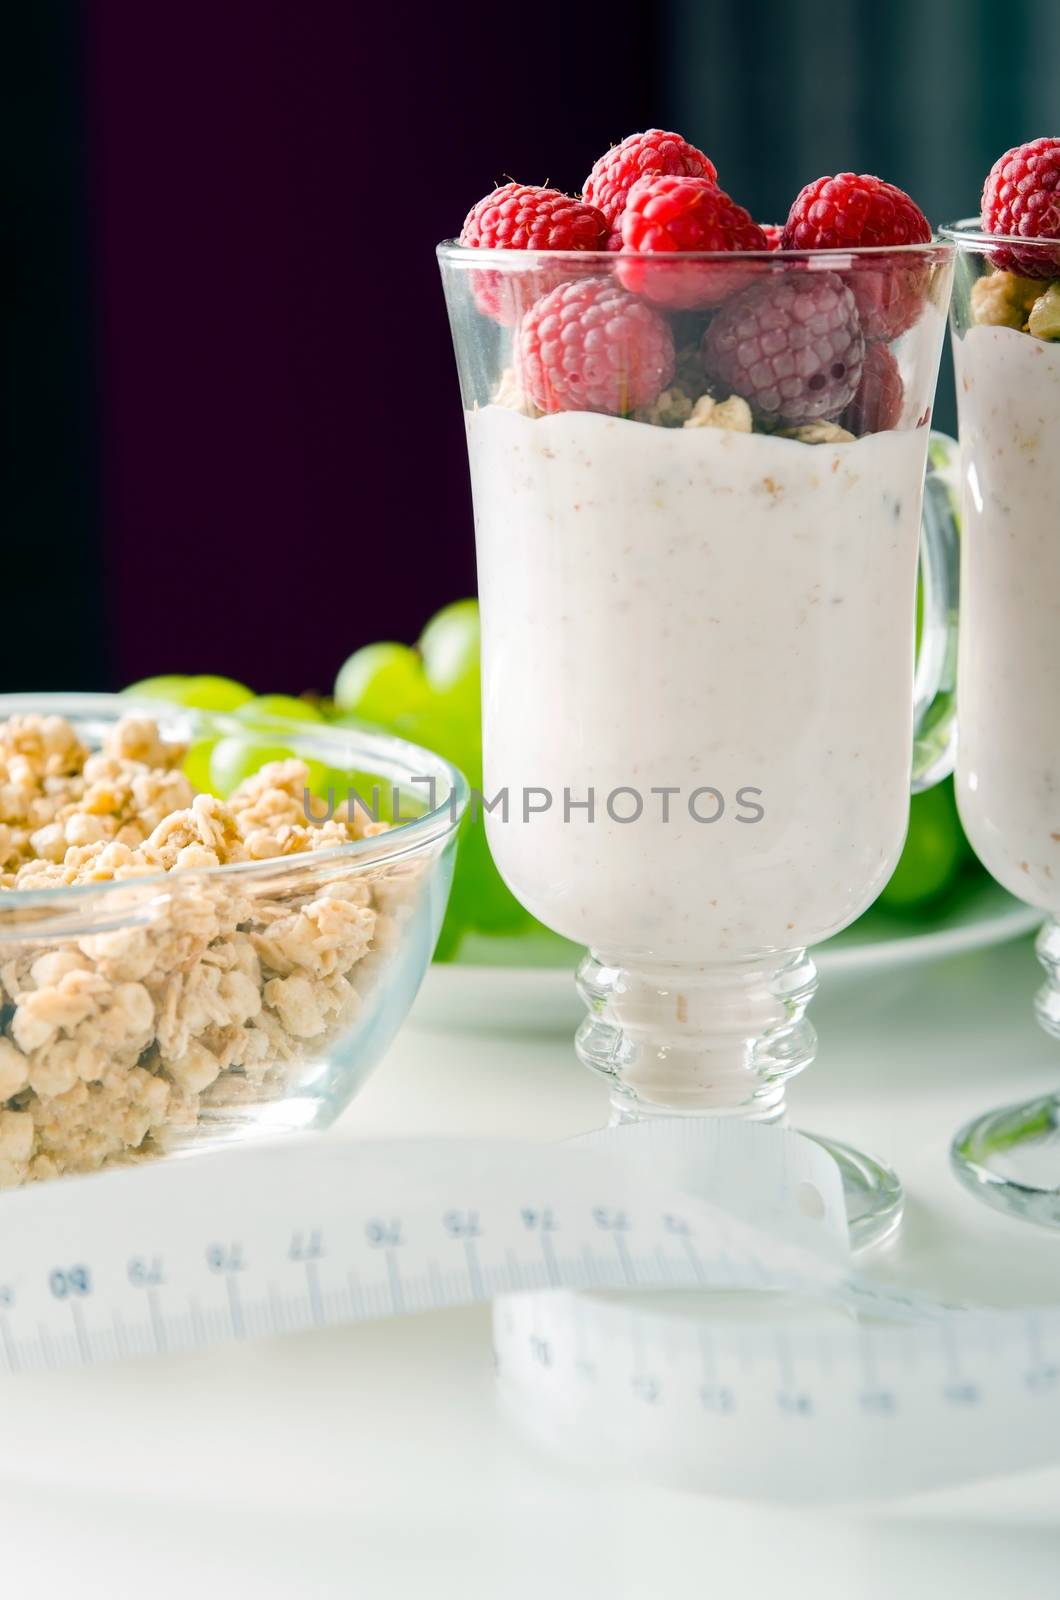 Glass of dessert with yoghurt, fresh berries and muesli. Grapes in background